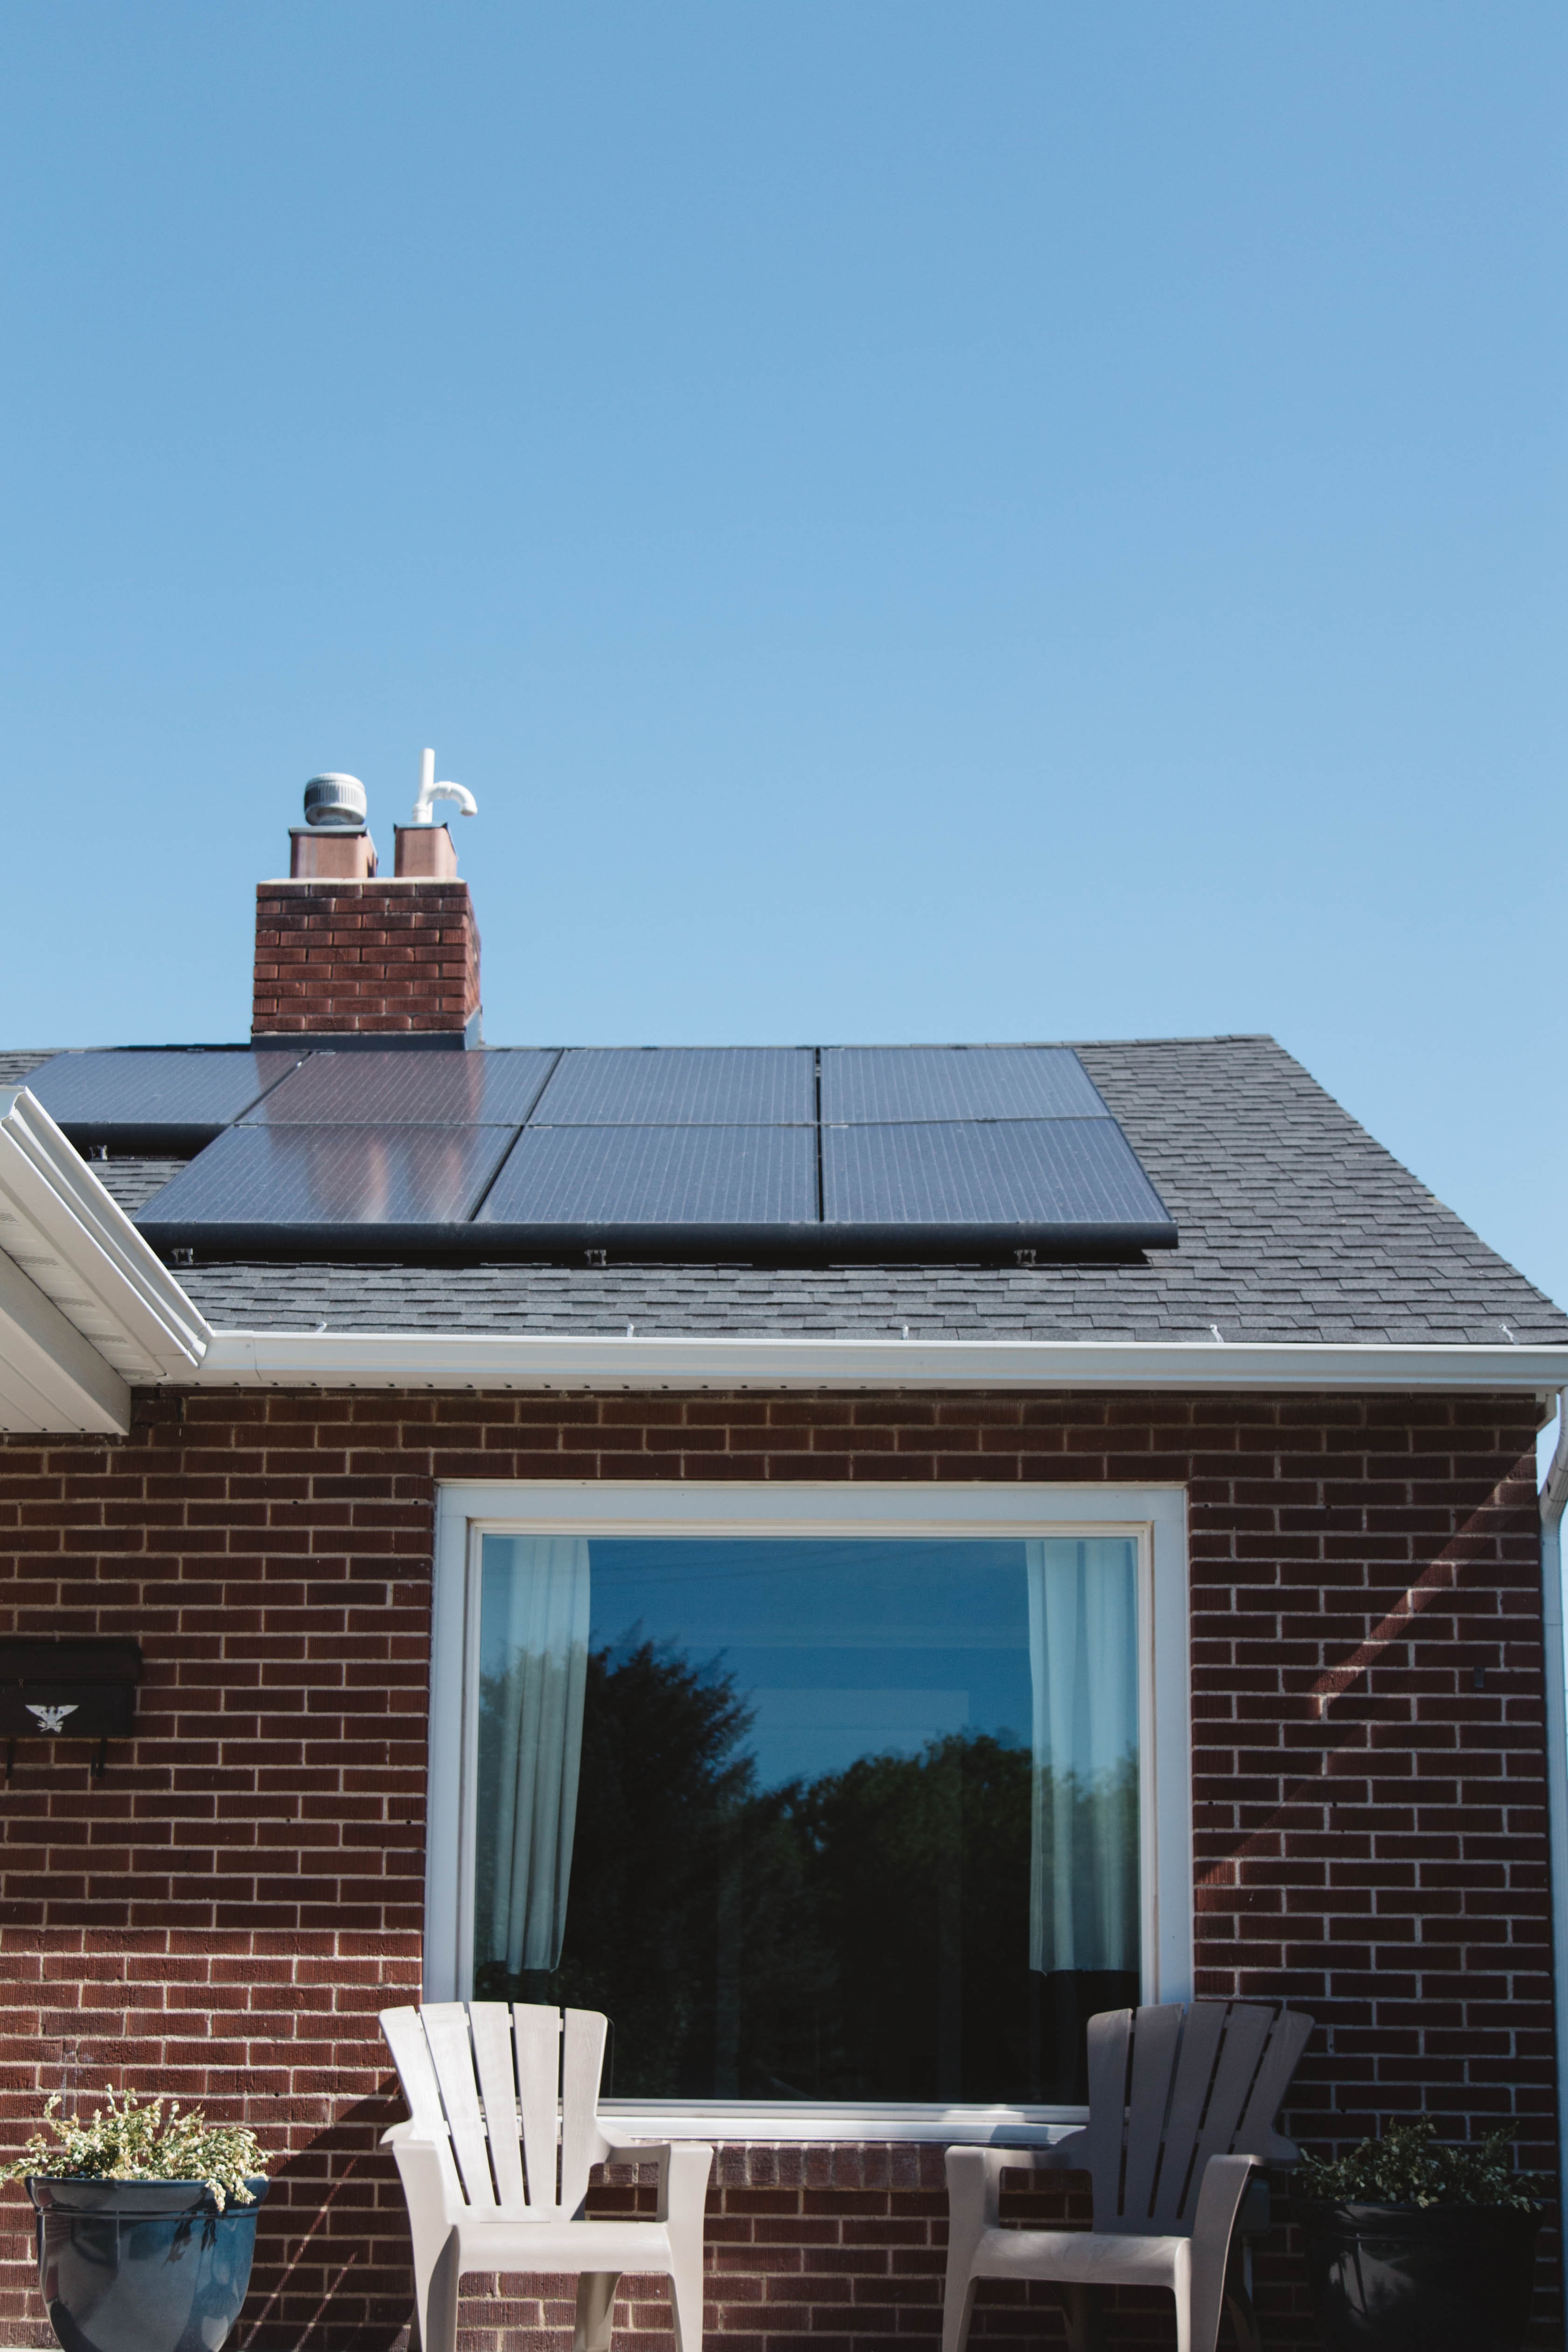 A house roof has 6 square black solar panels on it facing the sun